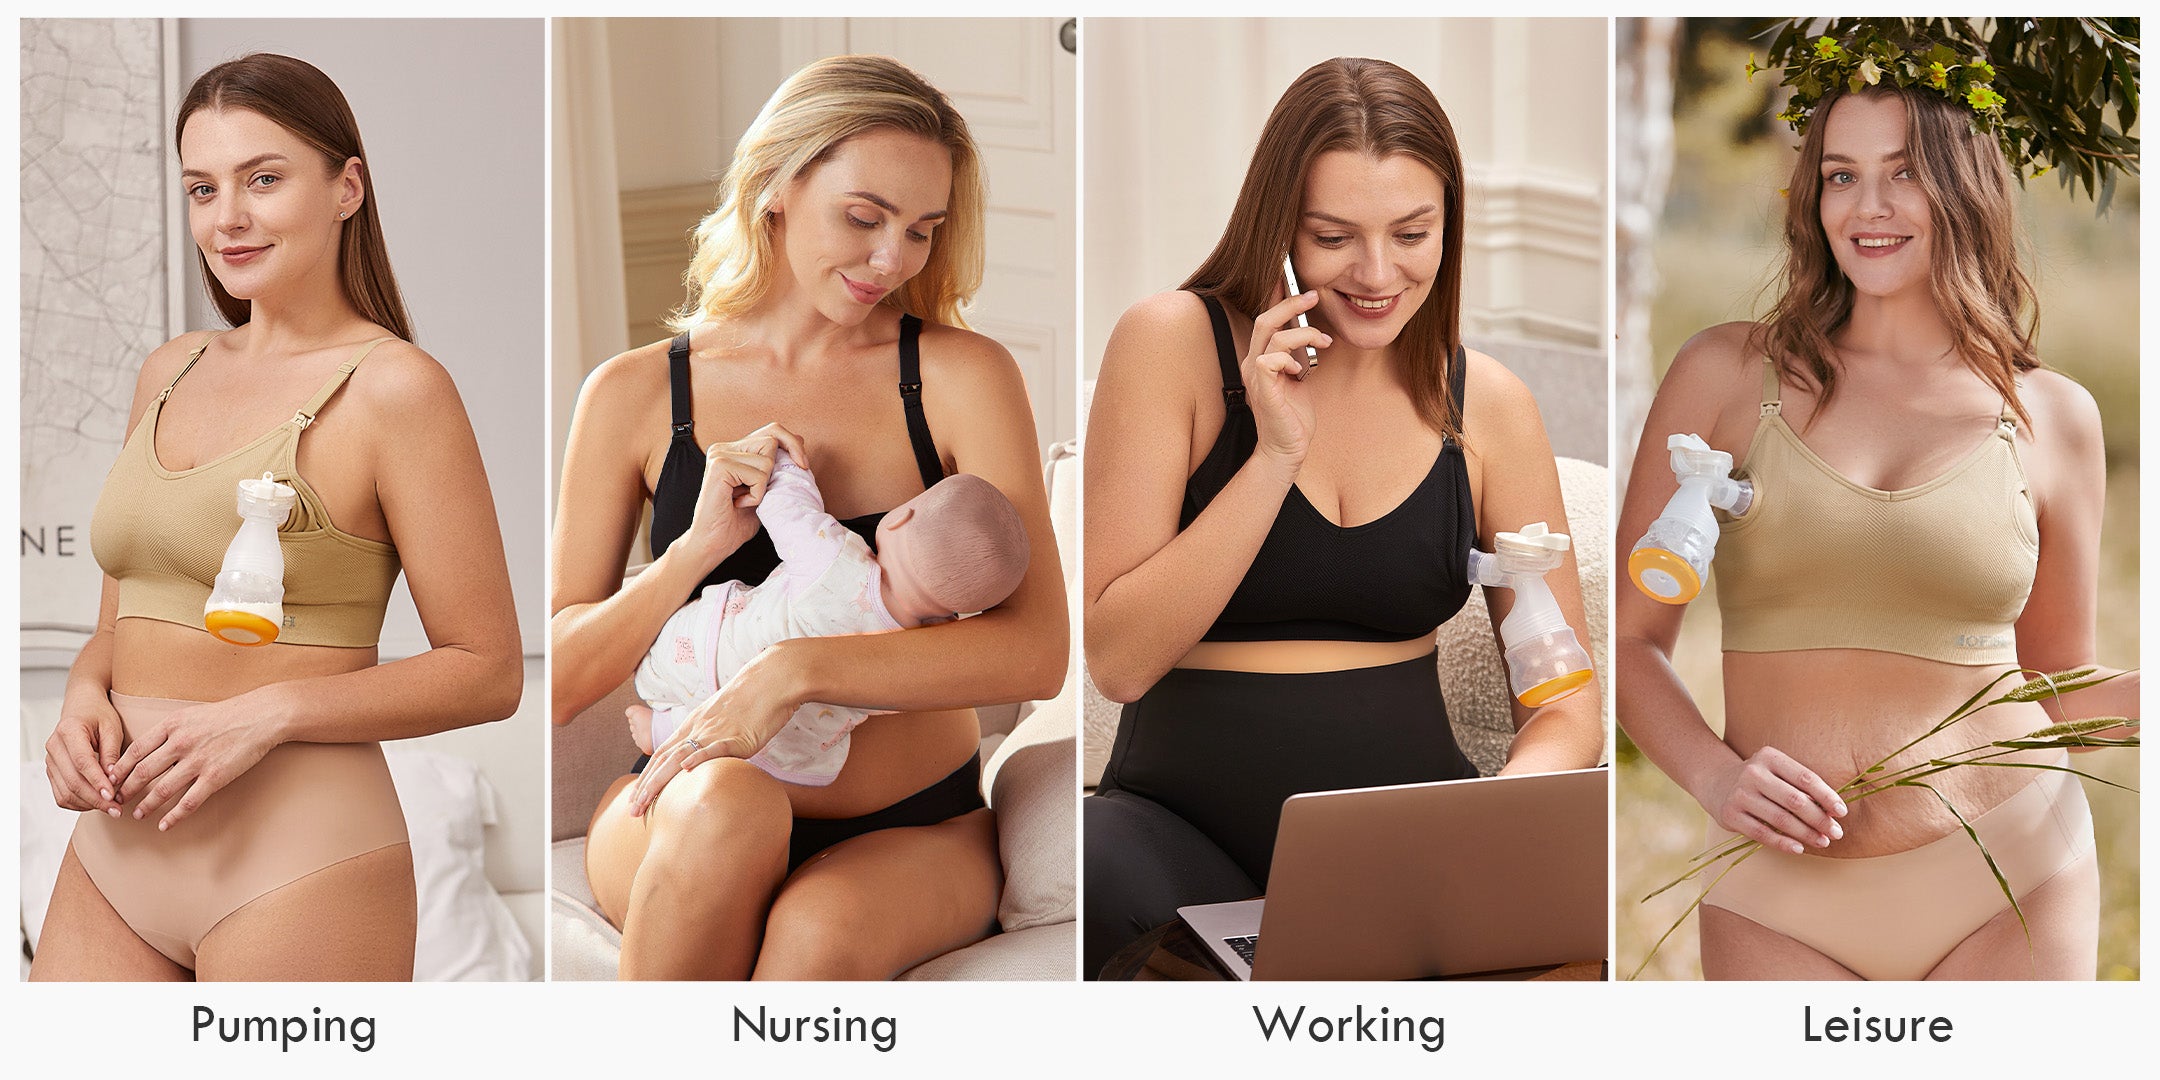 HOFISH 3 Pack Seamless Clip Down Deep V Neck Push Up Nursing Bra Maternity  Bras 3PACK Inlcuding Extenders & Clips, 3pcs/Pack (Push  Up:Pink-Black-Beige), Medium : : Clothing, Shoes & Accessories